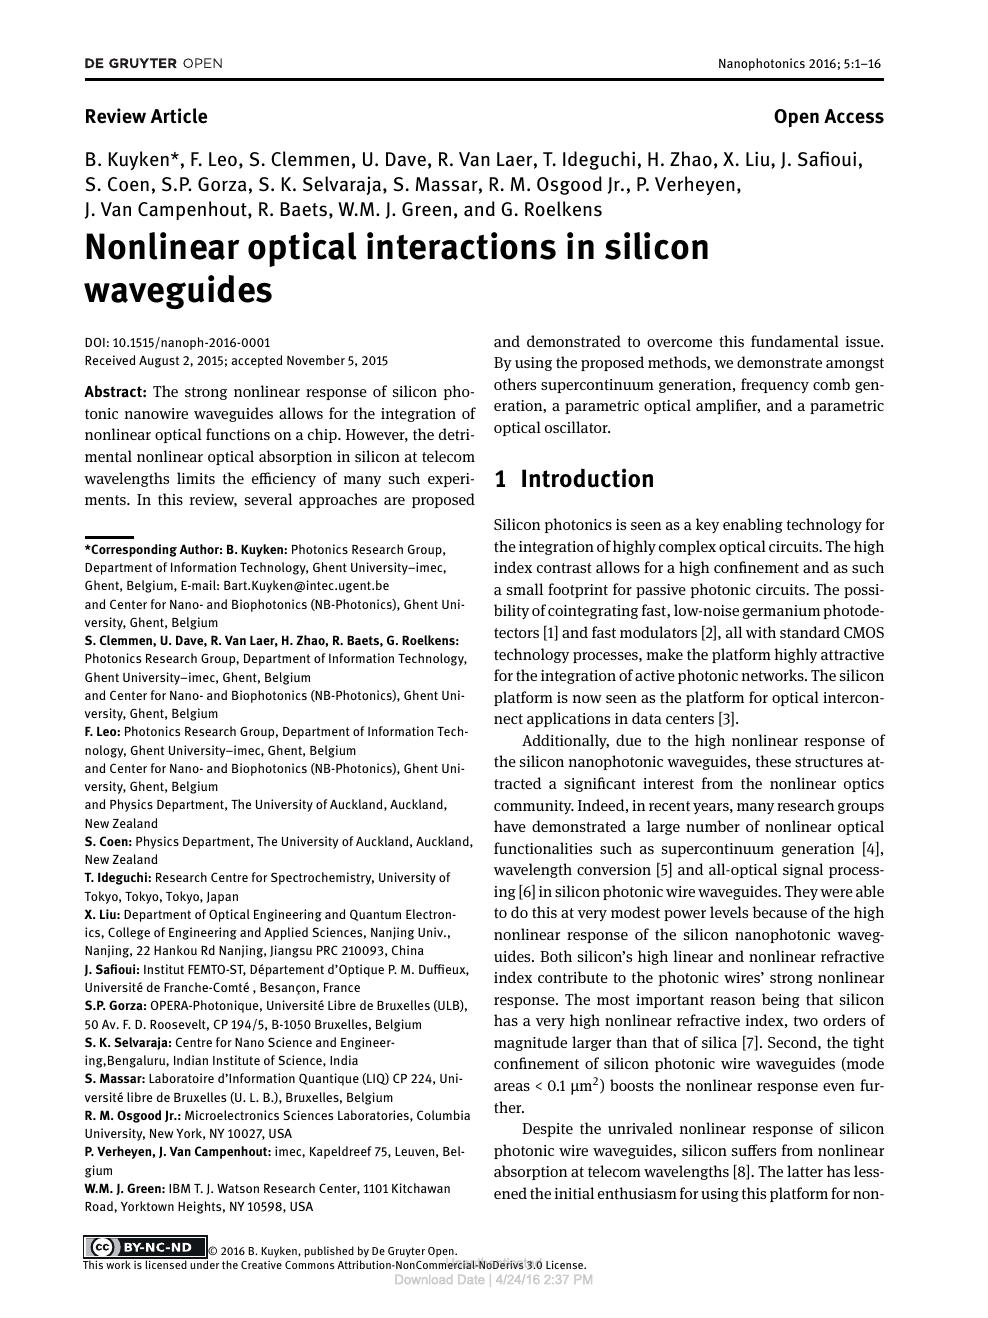 Nonlinear Optical Interactions In Silicon Waveguides Topic Of Research Paper In Nano Technology Download Scholarly Article Pdf And Read For Free On Cyberleninka Open Science Hub